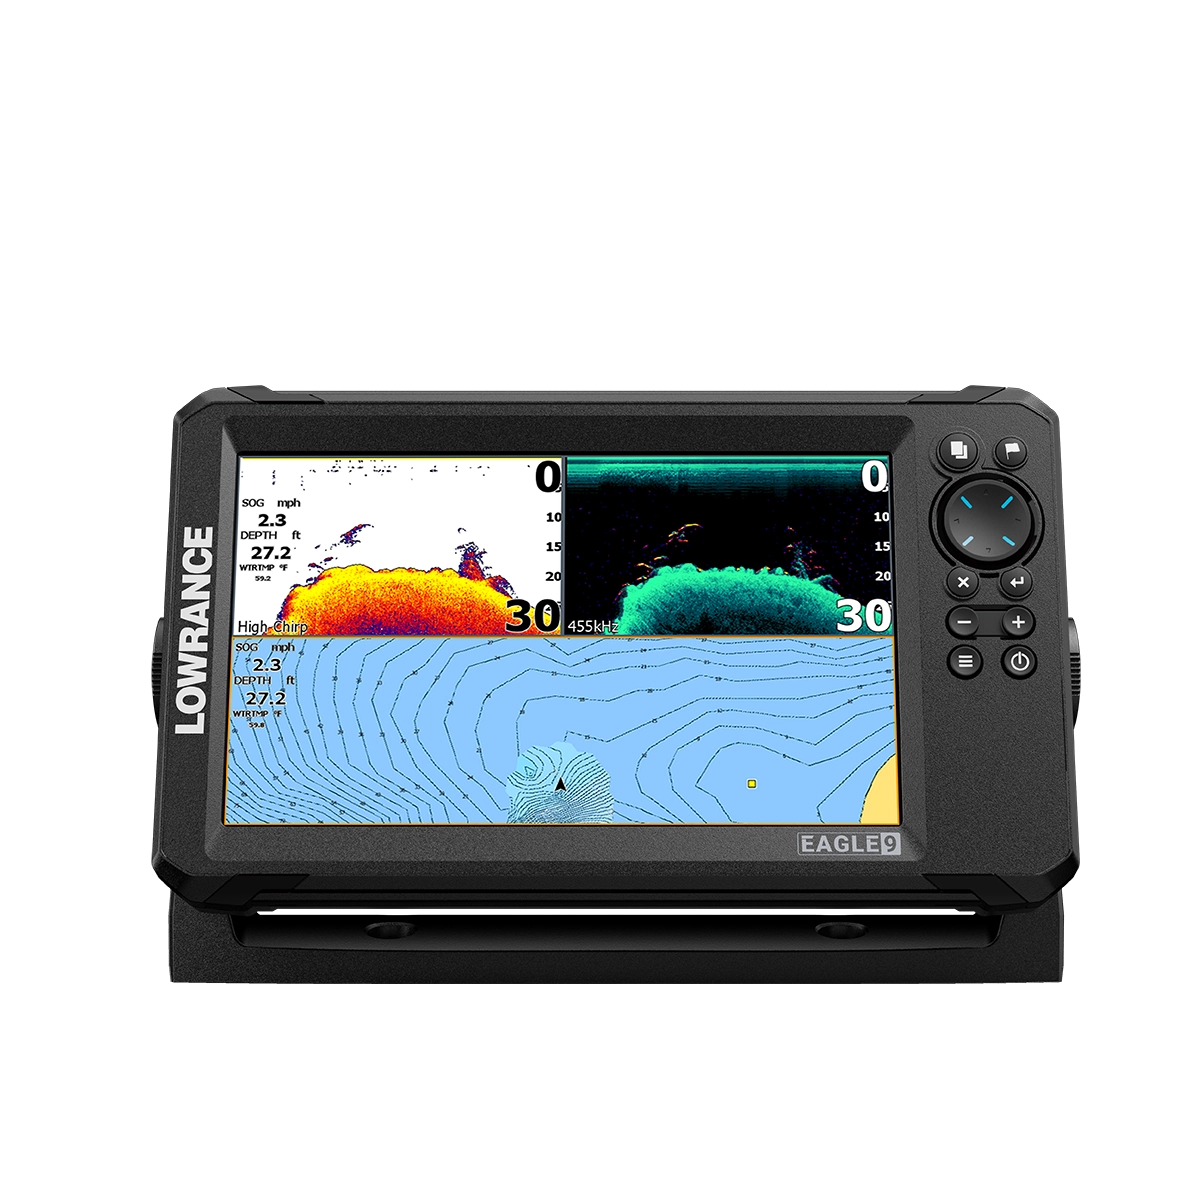 Lowrance EAGLE 9 TripleShot HD with C-MAP (000-16229-001) - GPS Central